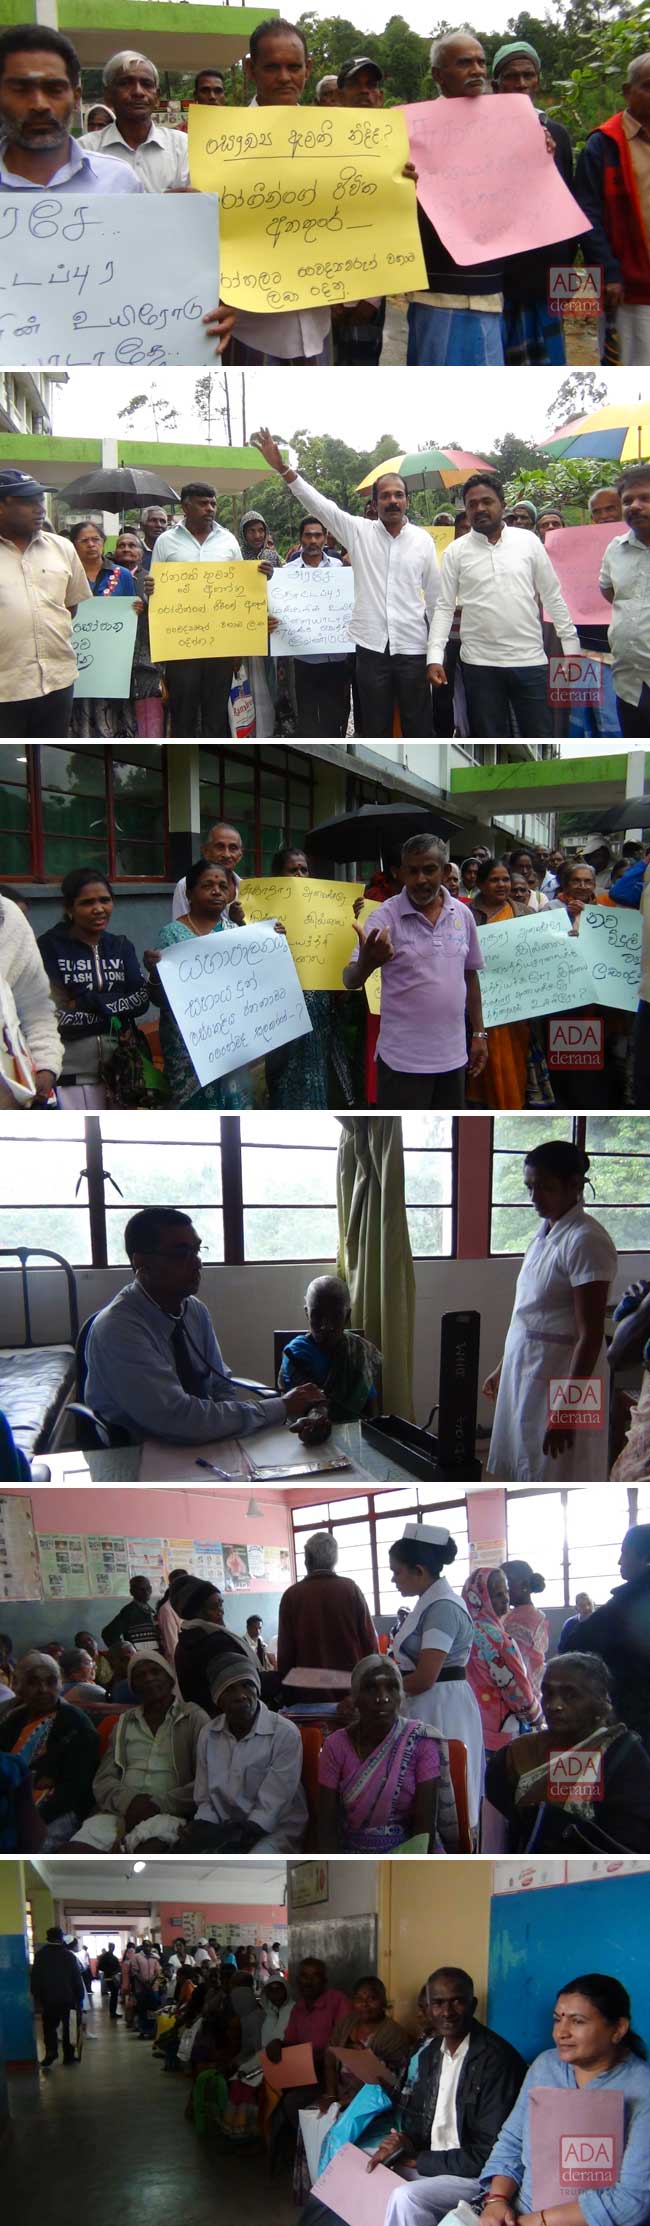 Patients and dev. committee protest lack of doctors at Maskeliya Hospital